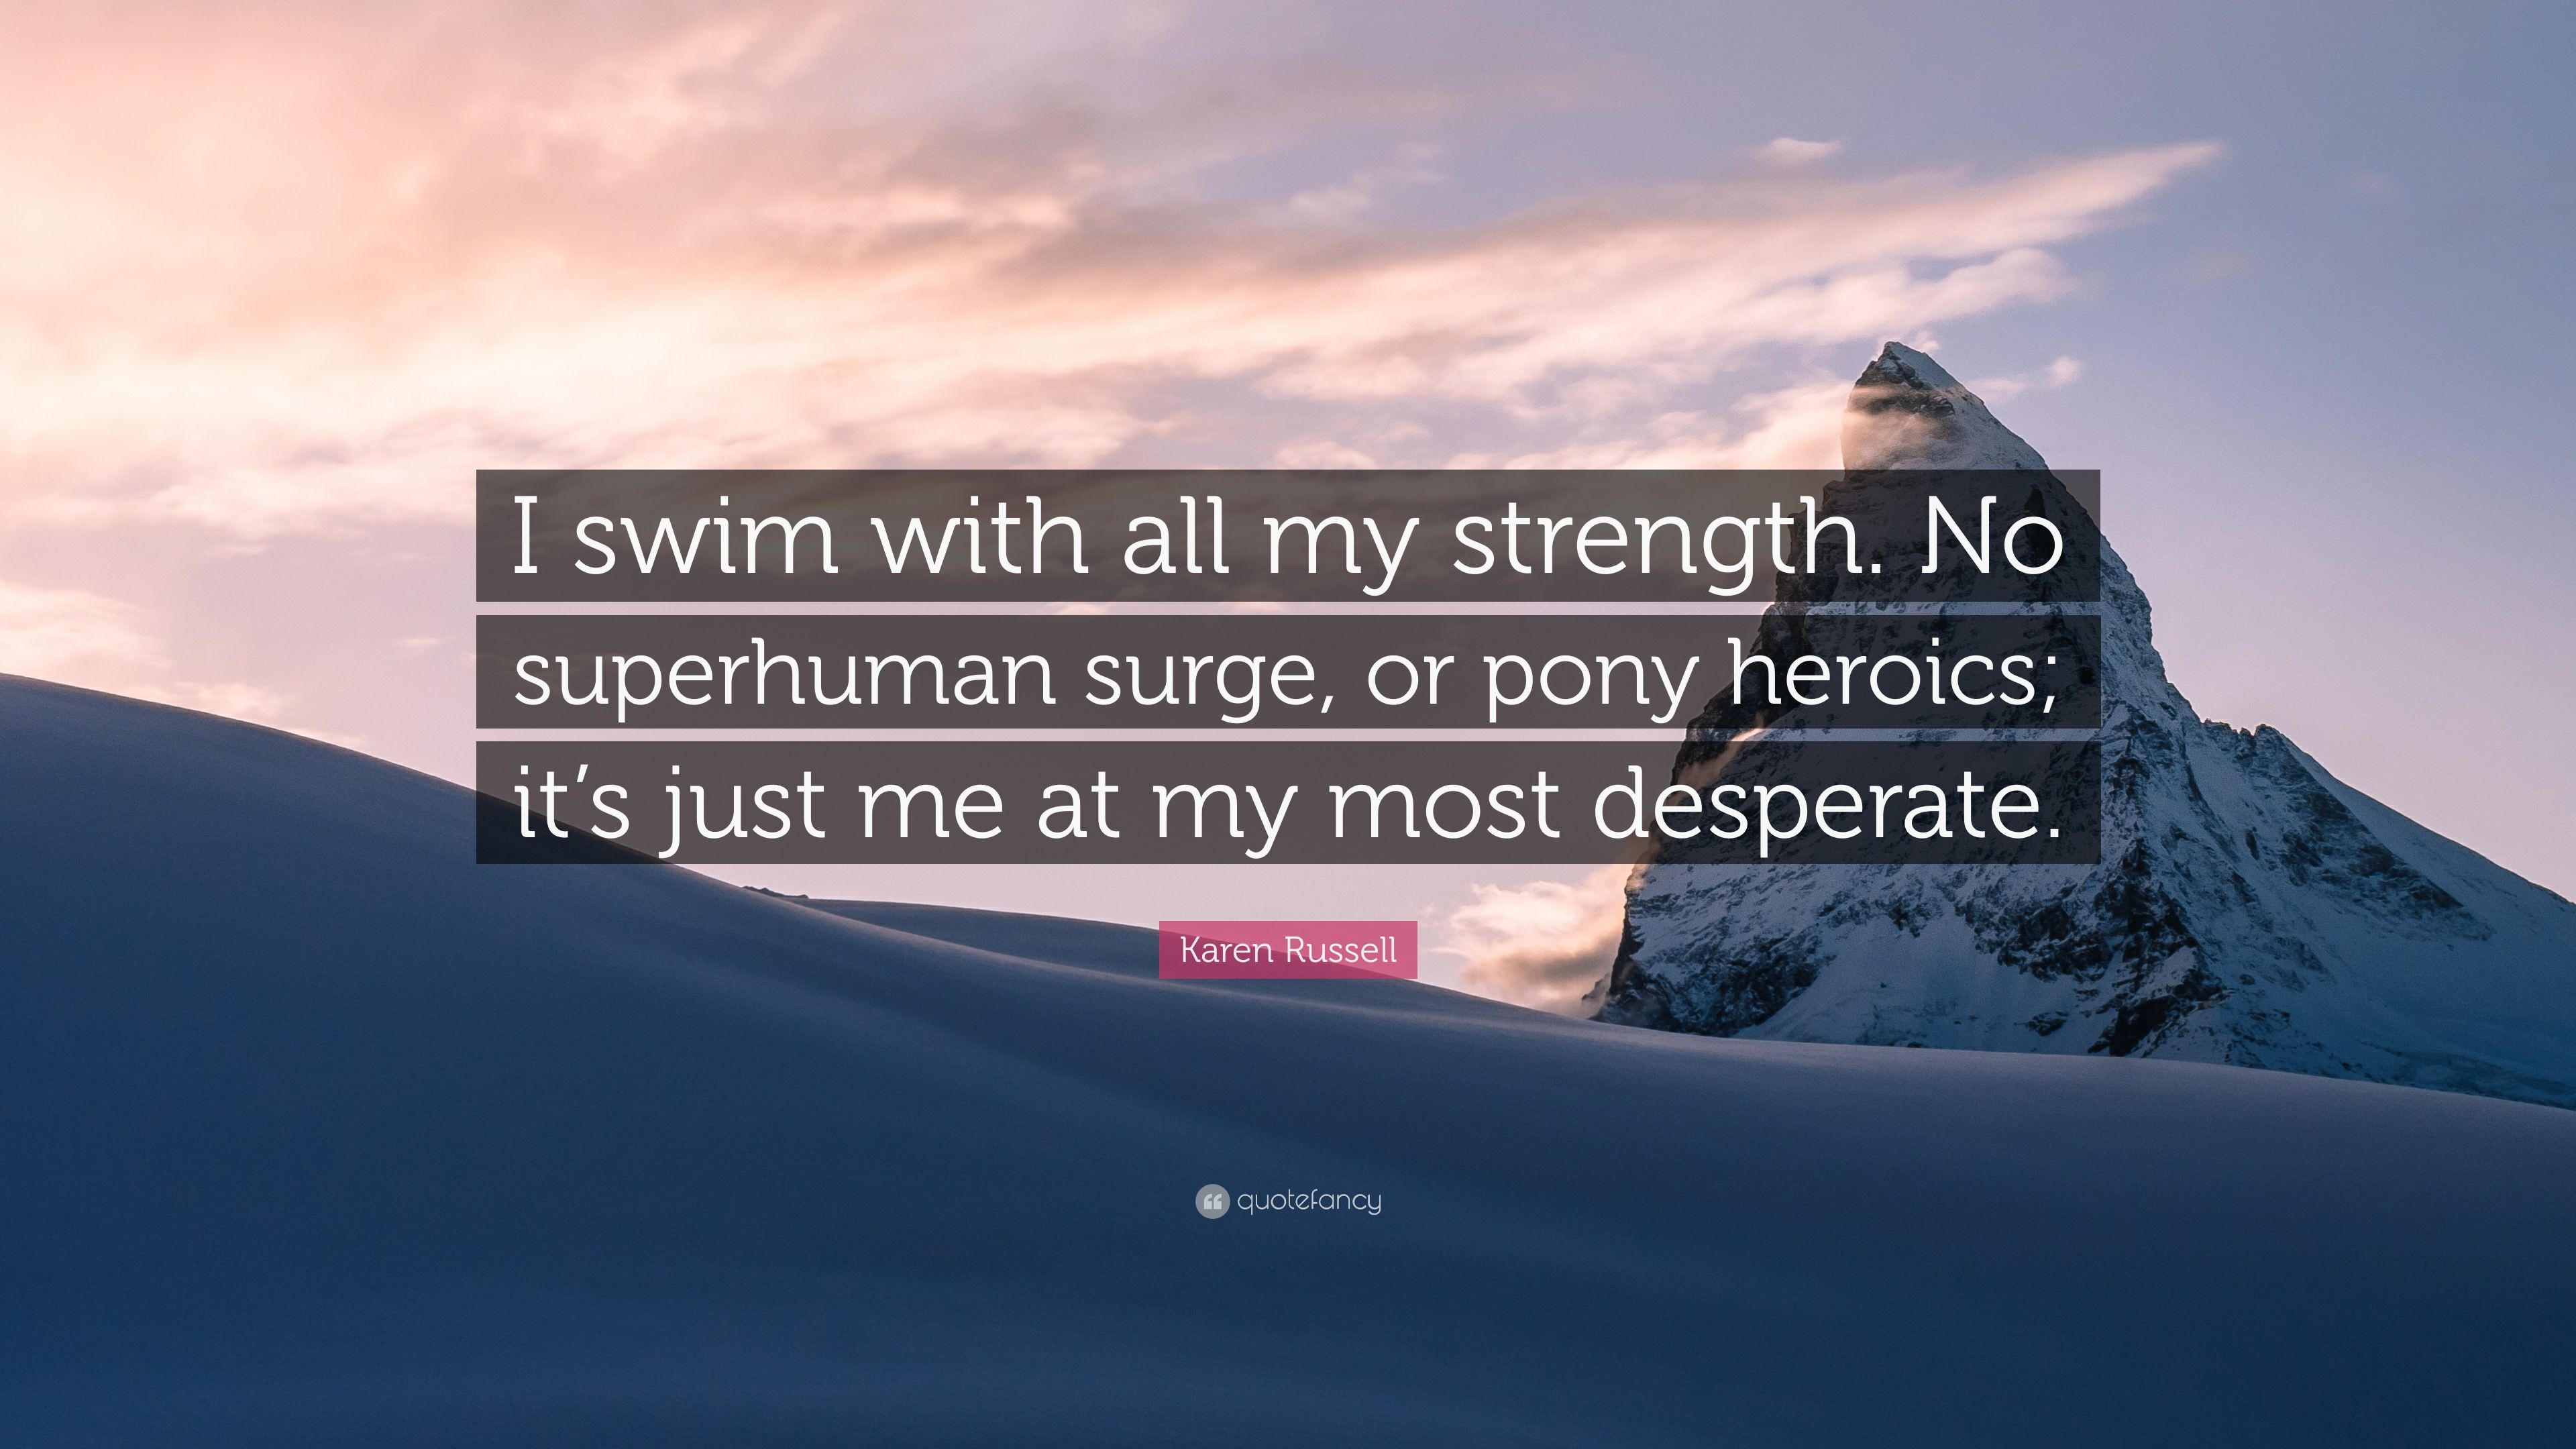 Karen Russell Quote: “I swim with all my strength. No superhuman surge, or pony heroics; it's just me at my most desperate.” (7 wallpaper)